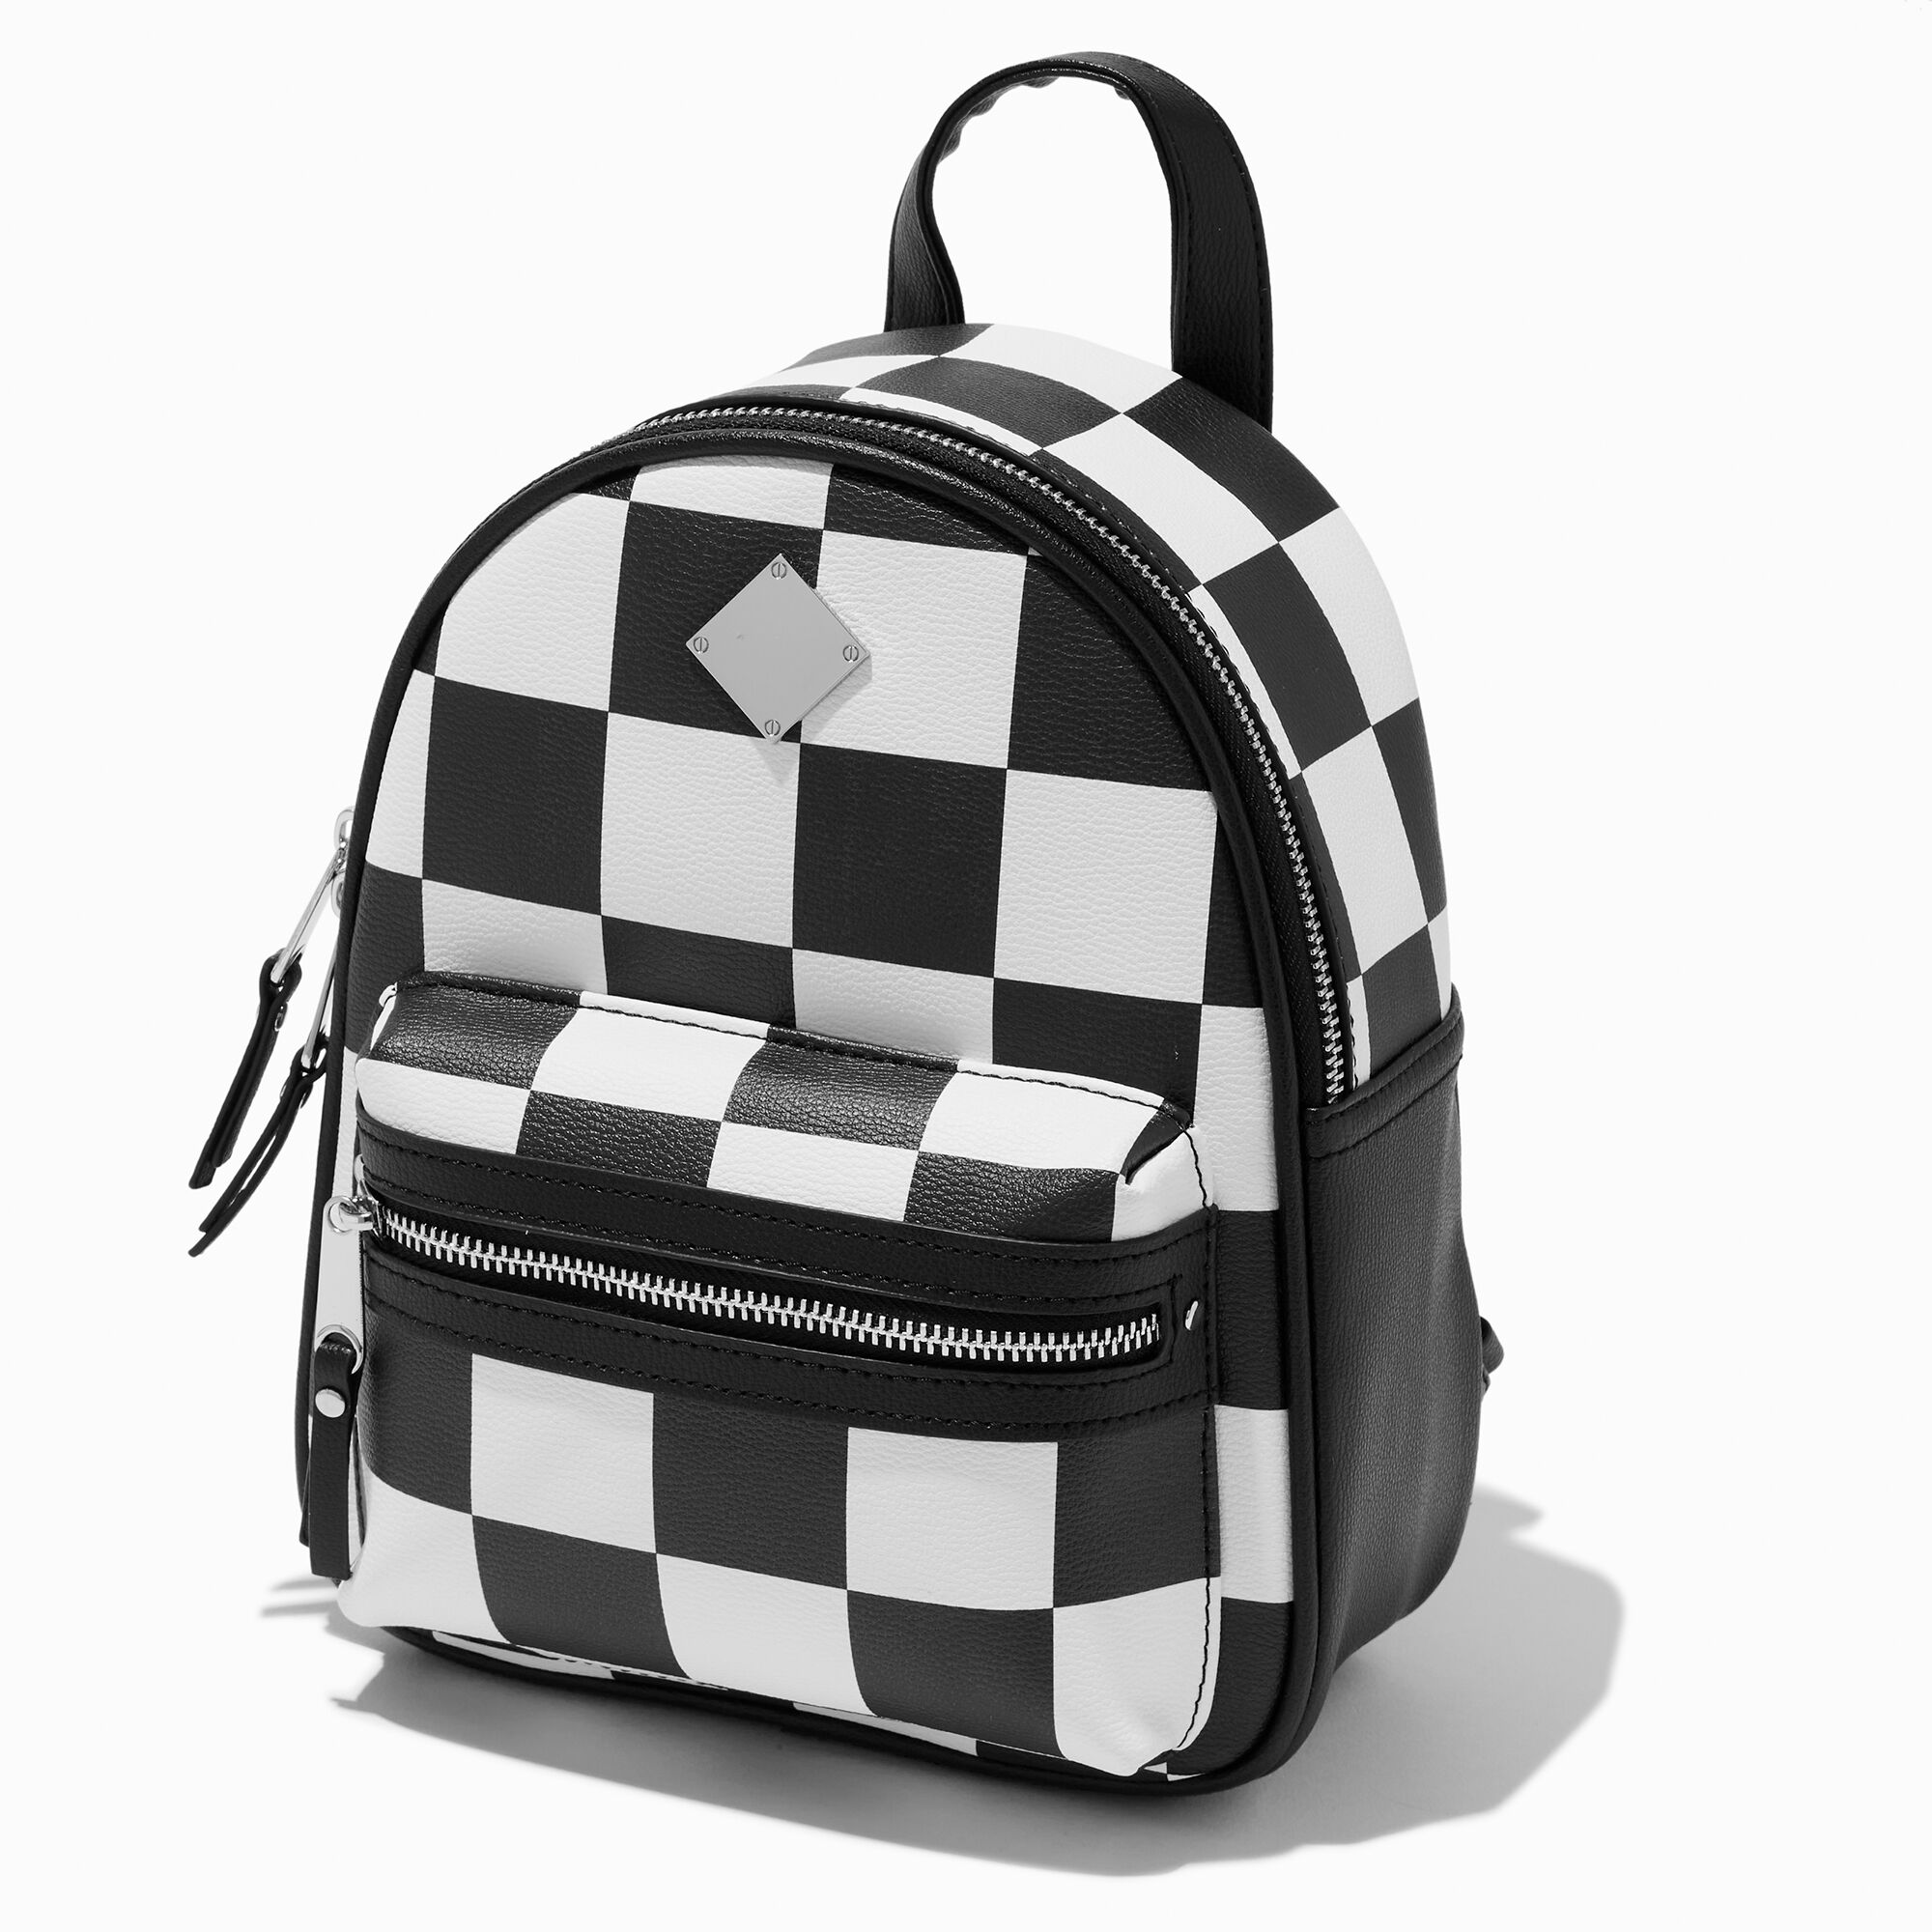 View Claires Black Check FauxLeather Medium Backpack White information